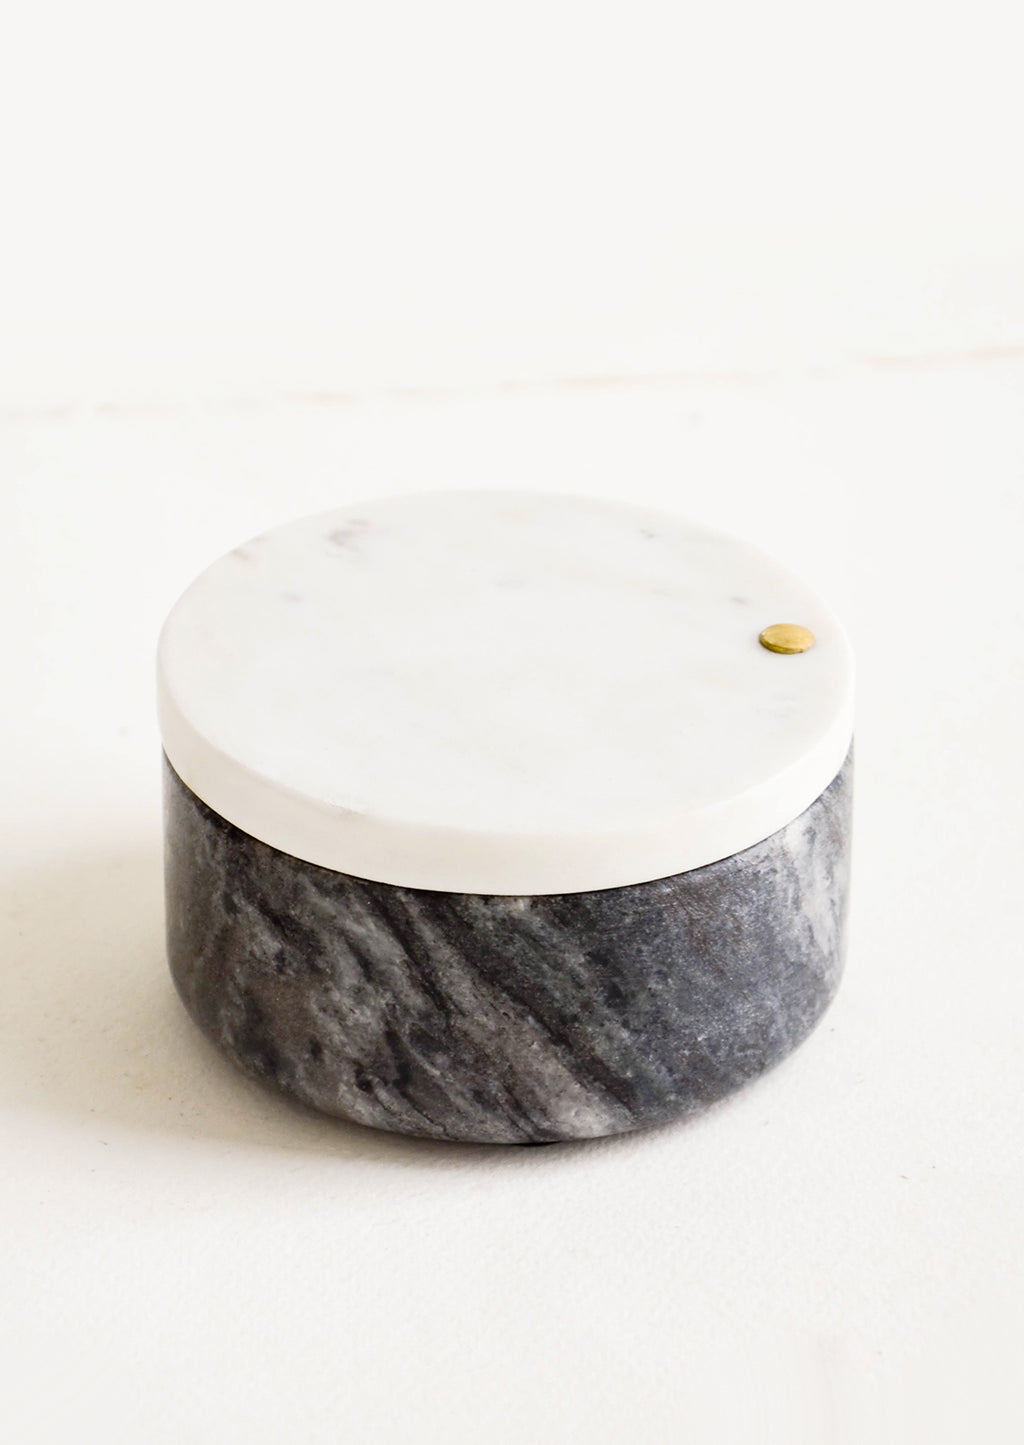 1: Round salt cellar made of black marble with white marble lid